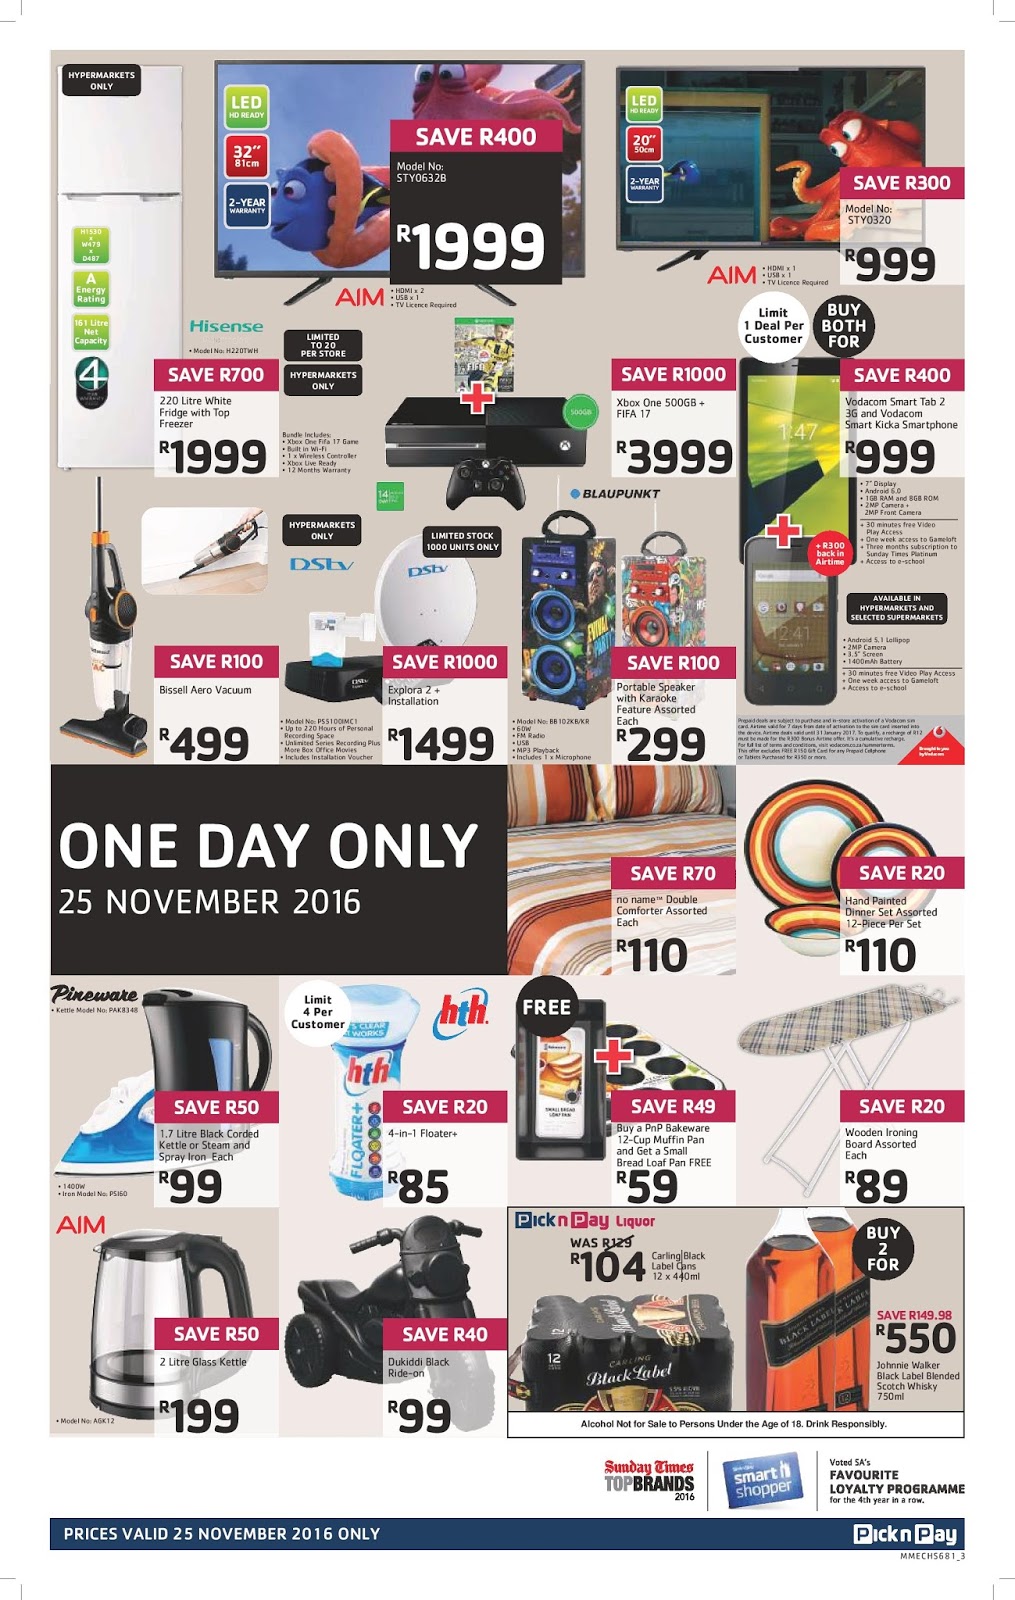 #BlackFriday Pick n Pay Top Best Black Friday Hot deals in South Africa - Does Southwest Have Deals On Black Friday